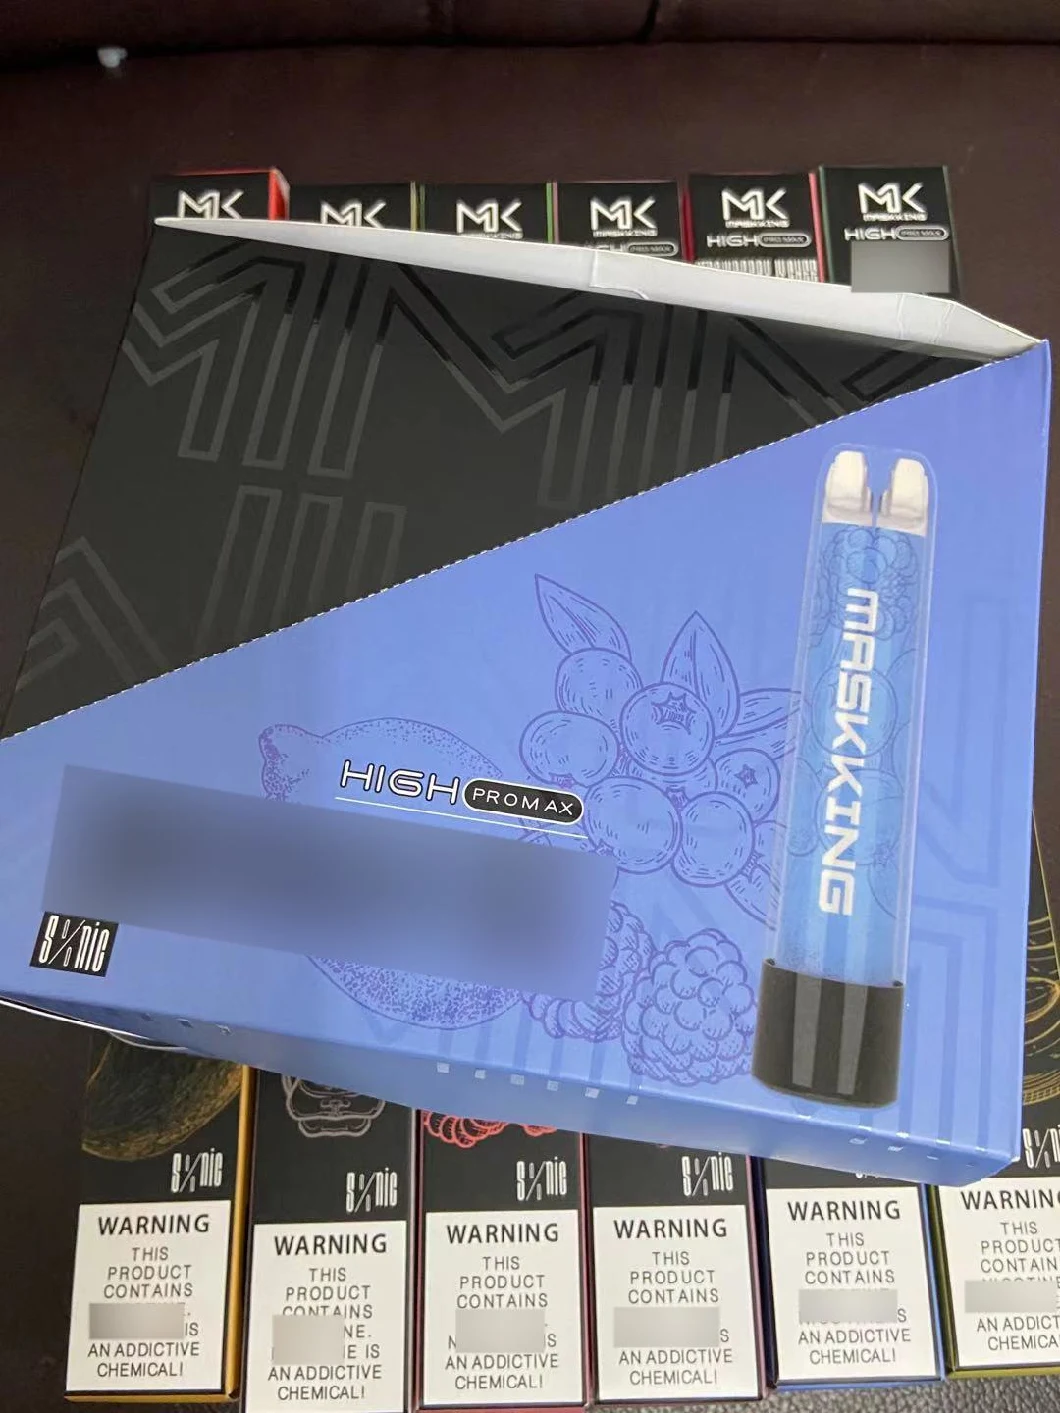 Customers Often Bought Withcompare with Similar Itemsmasking High PRO Max Disposable Vape Electronic Cigarettes 1500 Puffs 4.5ml Cartridge Ready to Use Trans